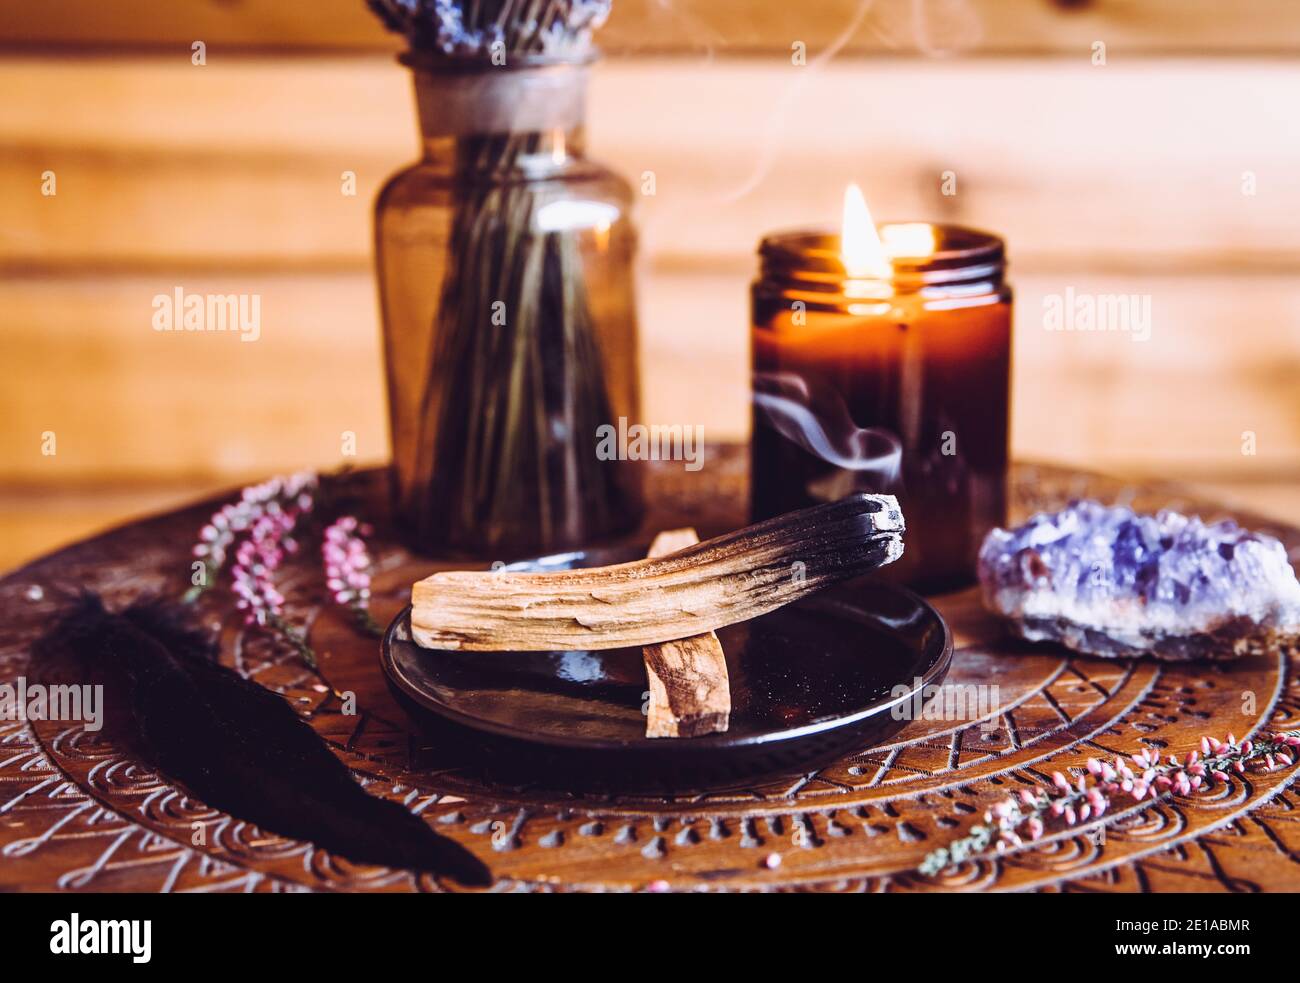 Palo Santo wood known as oily aromatic holy wood sticks smouldering on plate in home living room cleansing negative energy concept. Bohemian style. Stock Photo